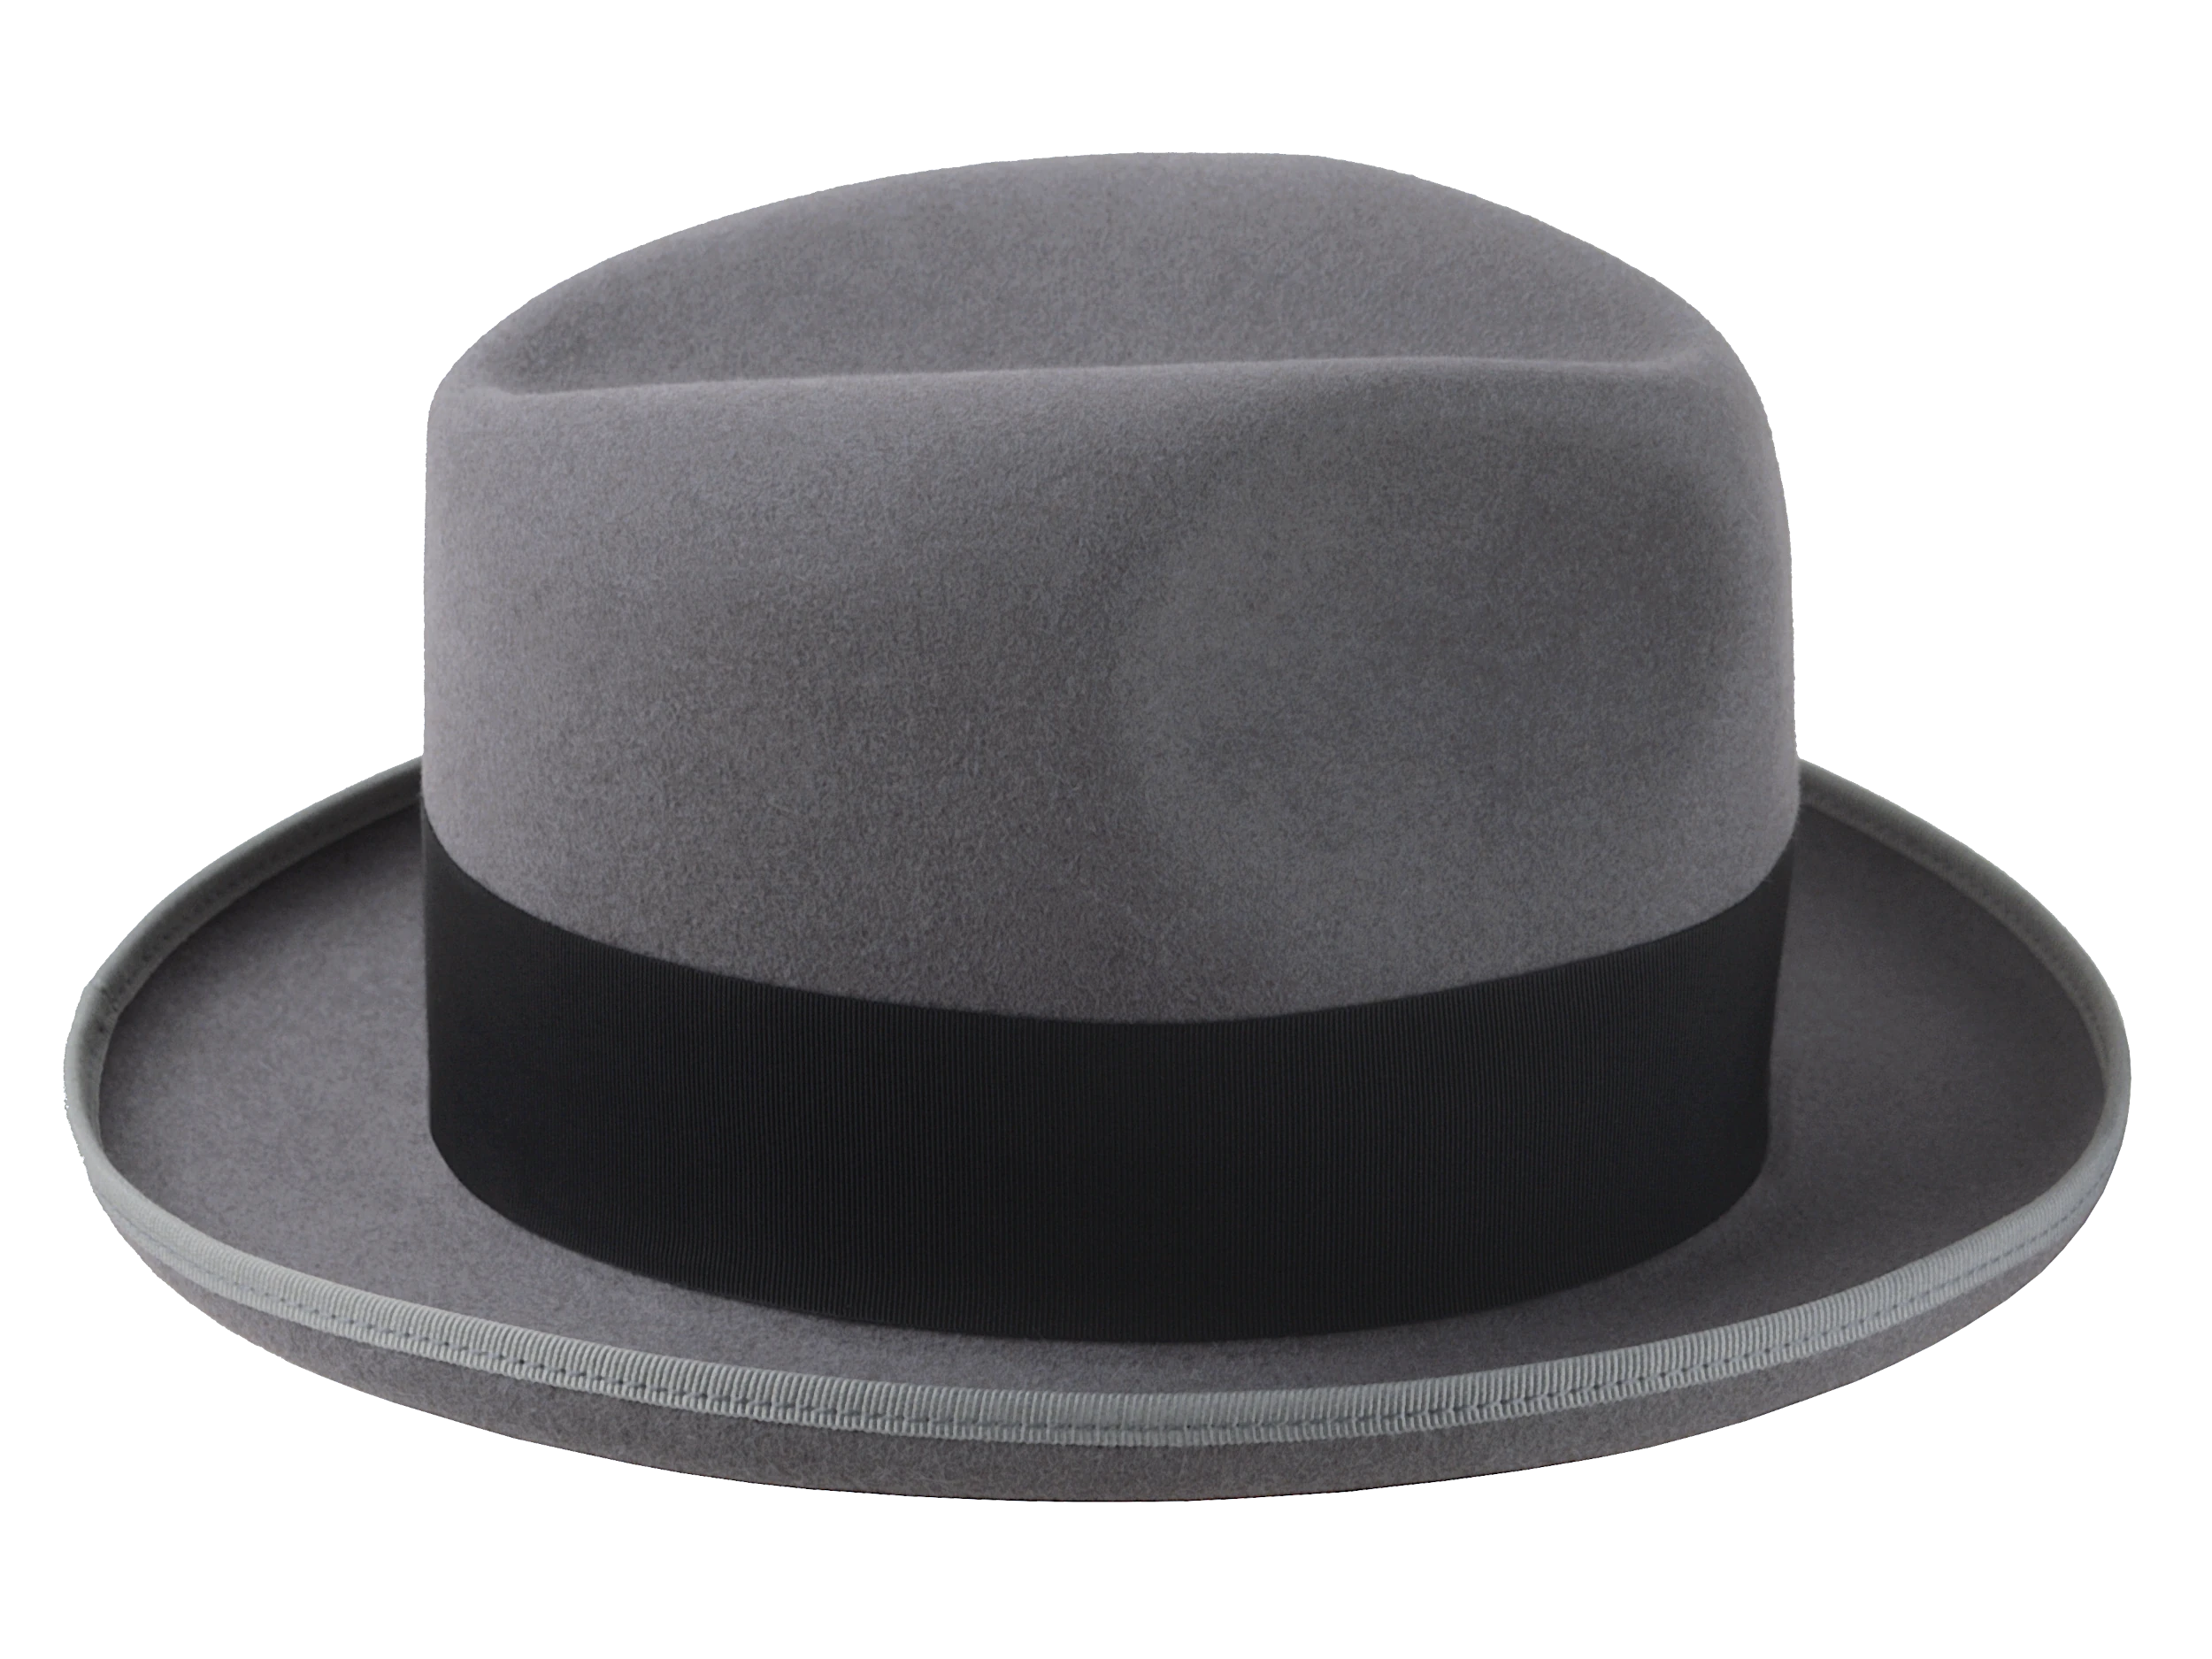 The Grandmaster: Angle highlighting the hat’s proportional elegance and design | Agnoulita Hats